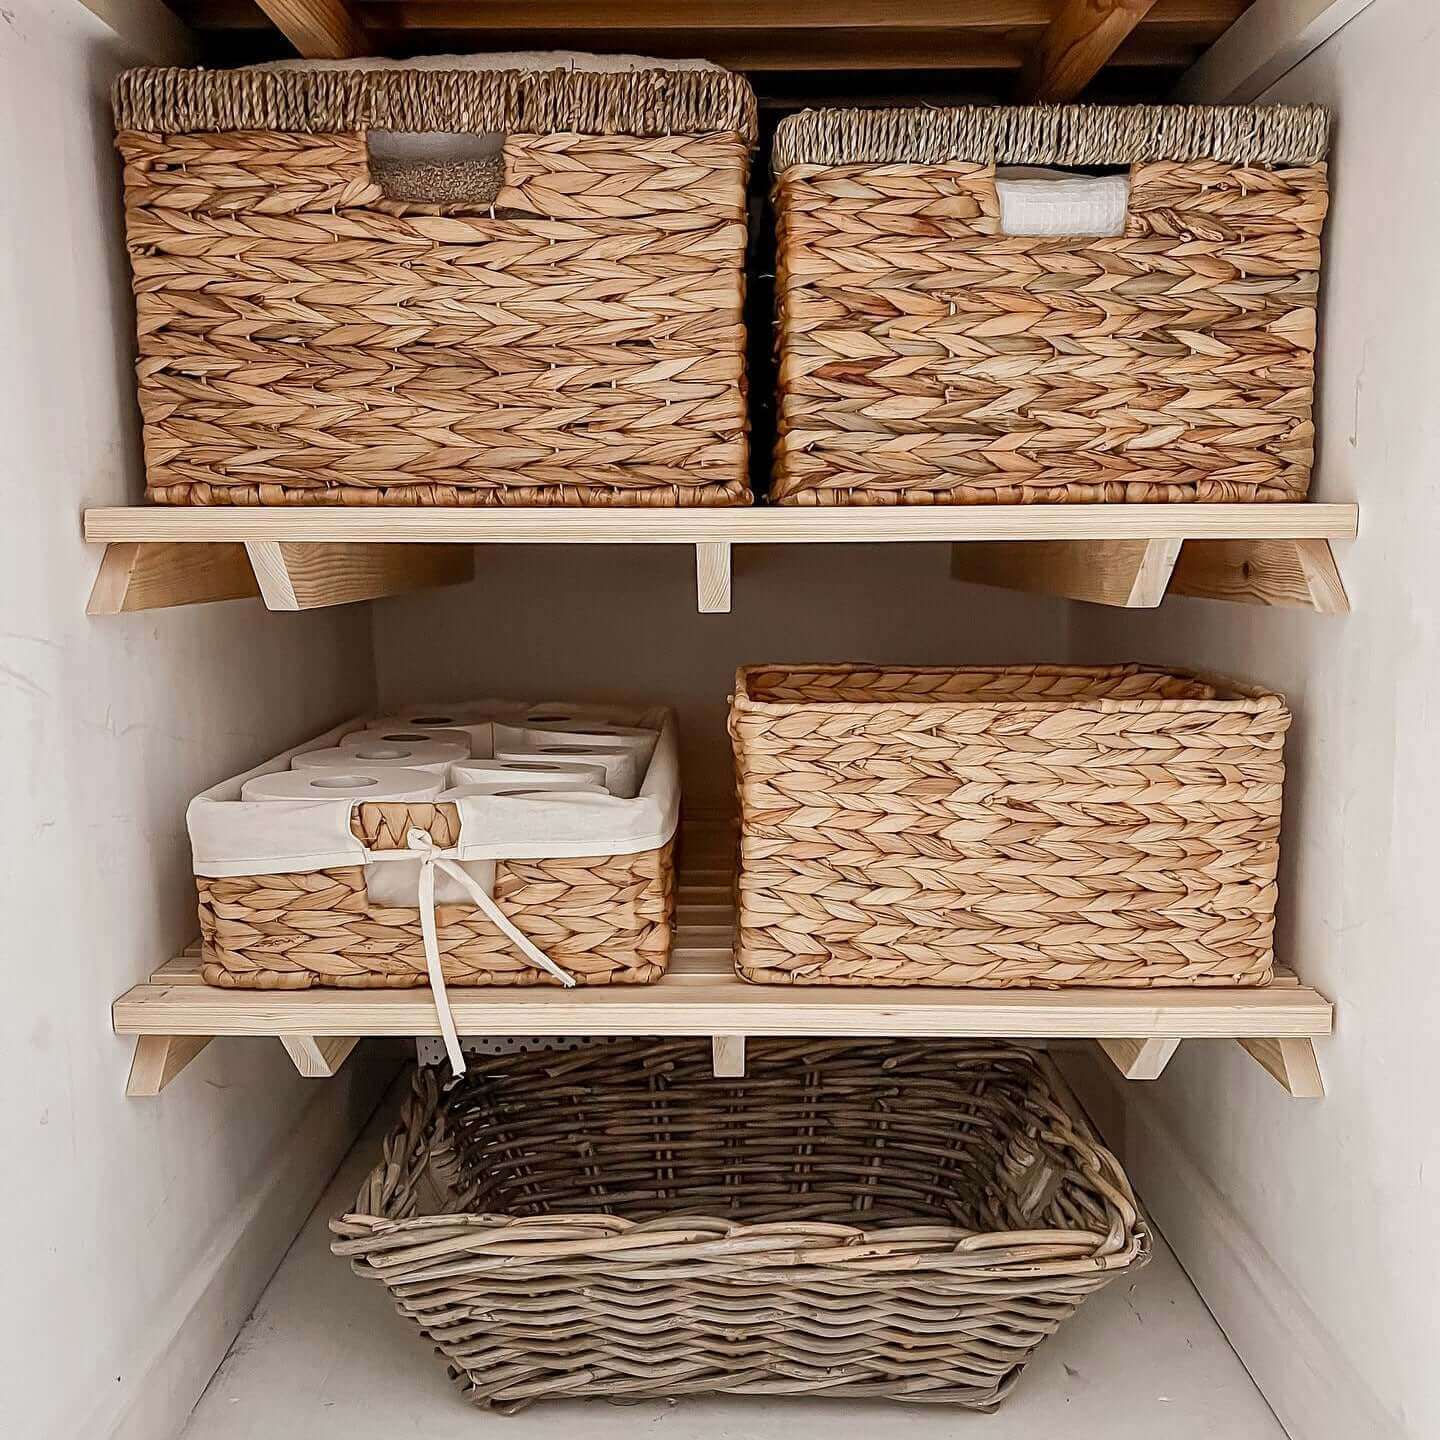 Airing Cupboard Wooden Slatted Shelves - 91 cm by 63 cm